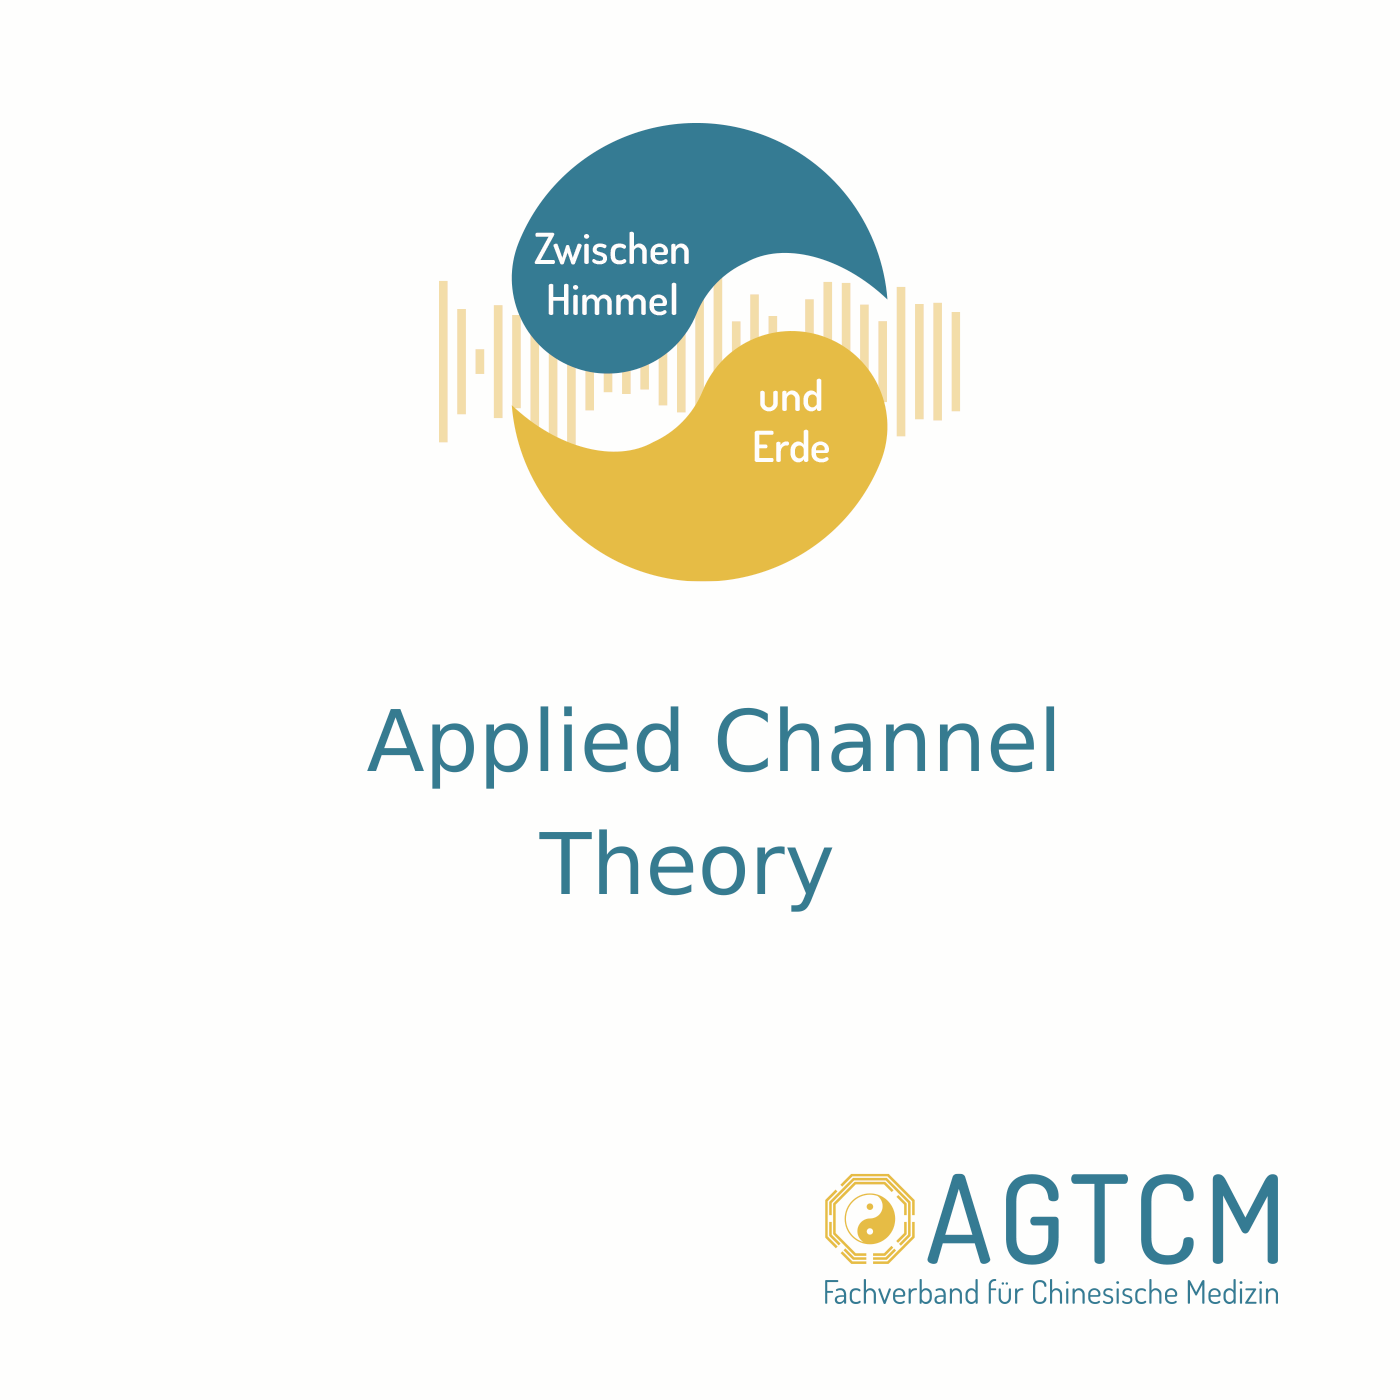 Applied Channel Theory